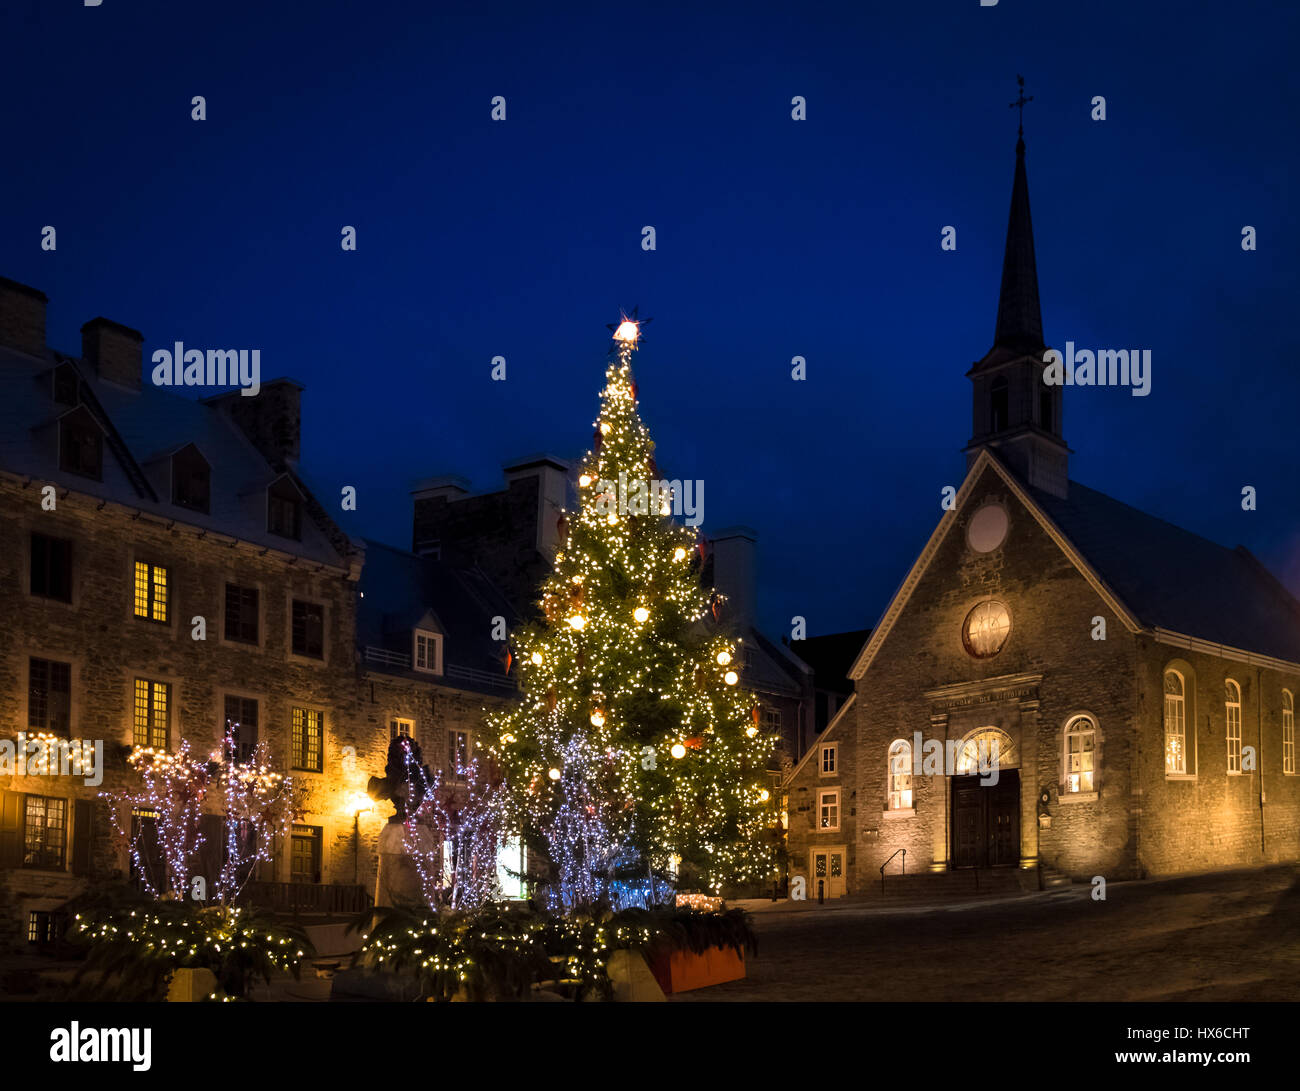 Place Royale (Royal Plaza) and Notre Dame des Victories Church decorated for Christmas at night - Quebec City, Canada Stock Photo